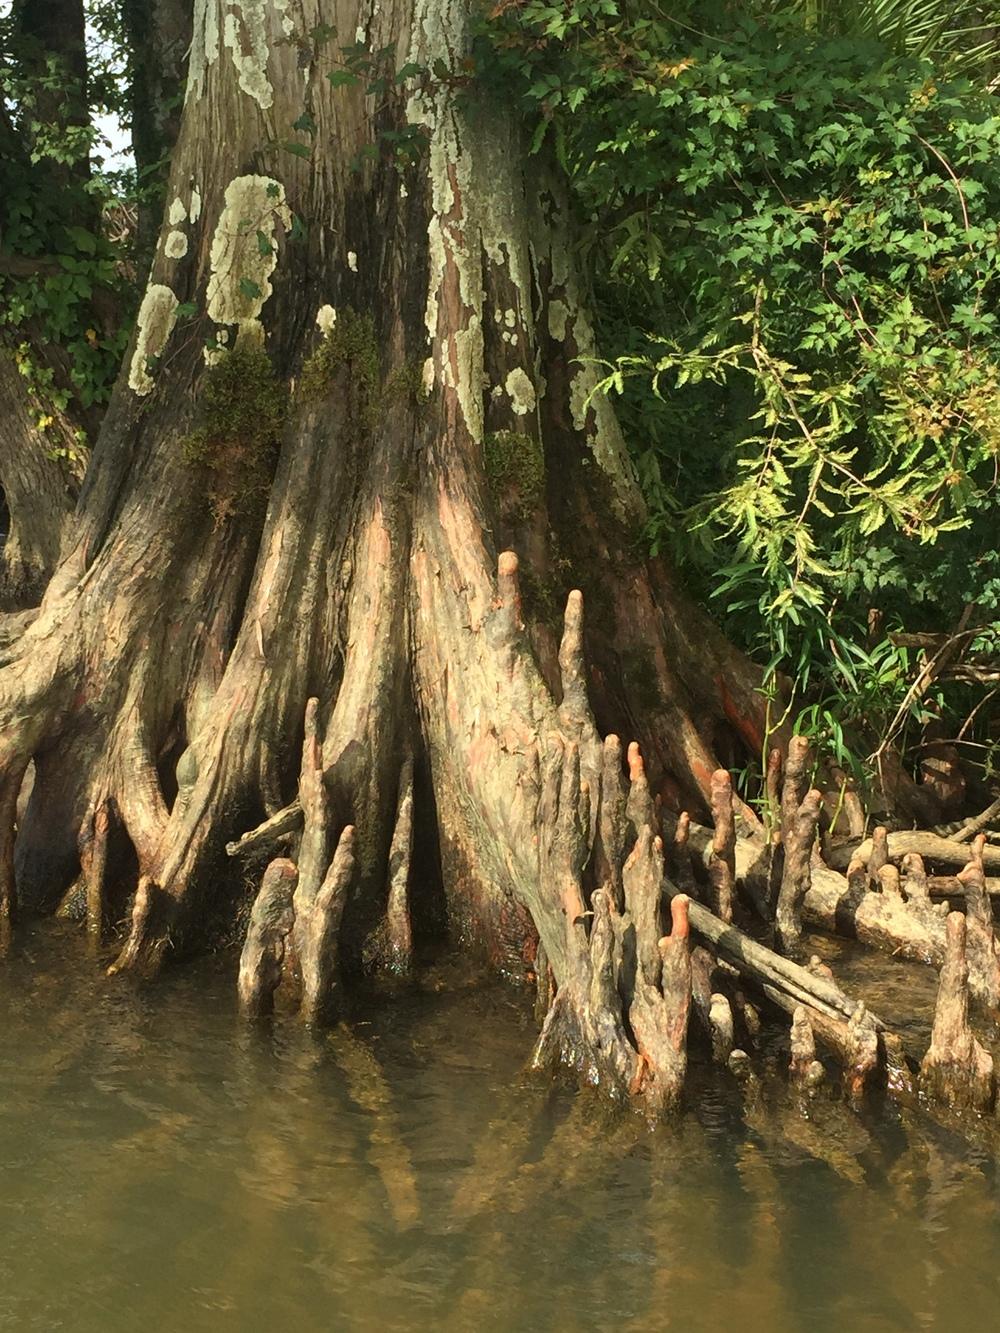 Photo of Bald Cypress (Taxodium distichum) uploaded by WhistlingWisteria